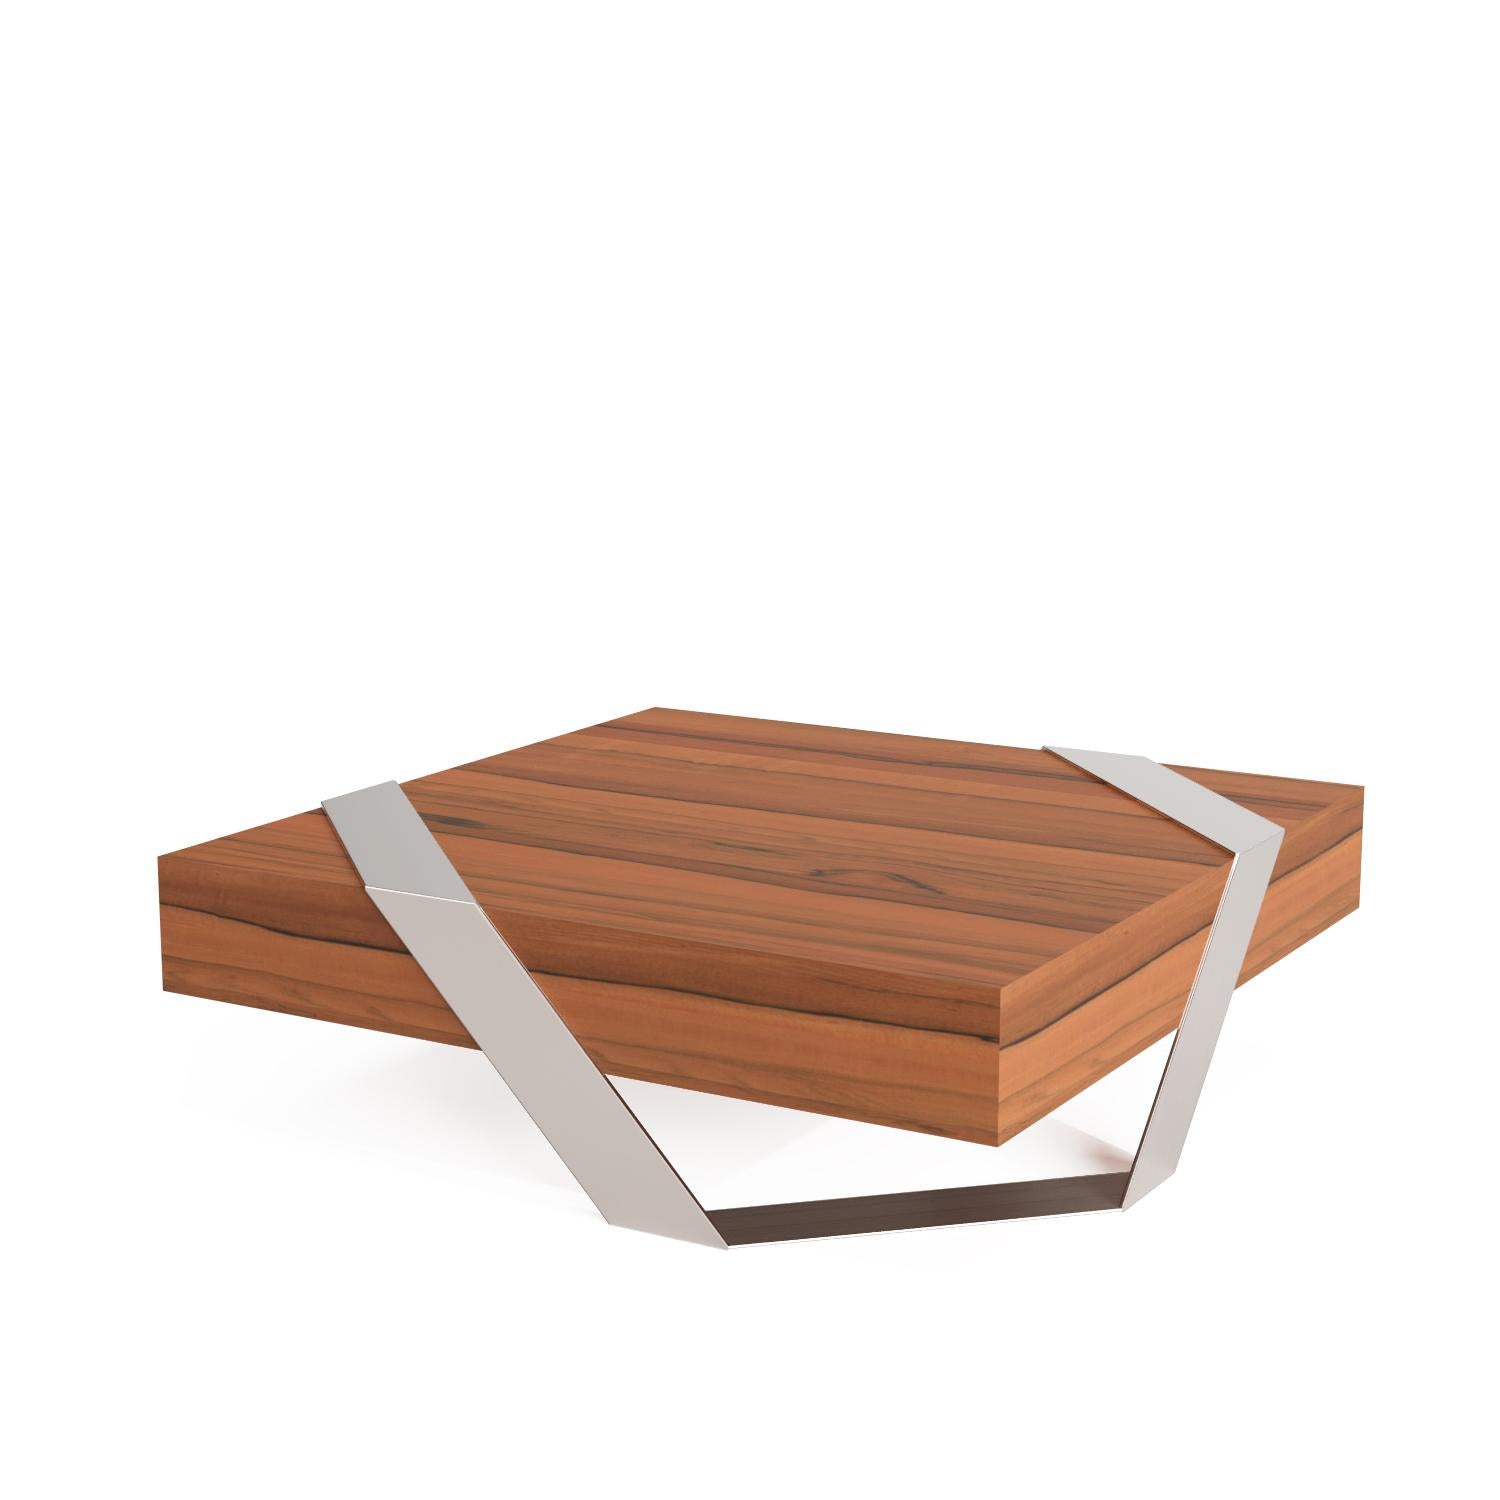 Modern Minimalist Square Center Coffee Table Tineo Wood Brushed Stainless Steel In New Condition For Sale In Vila Nova Famalicão, PT